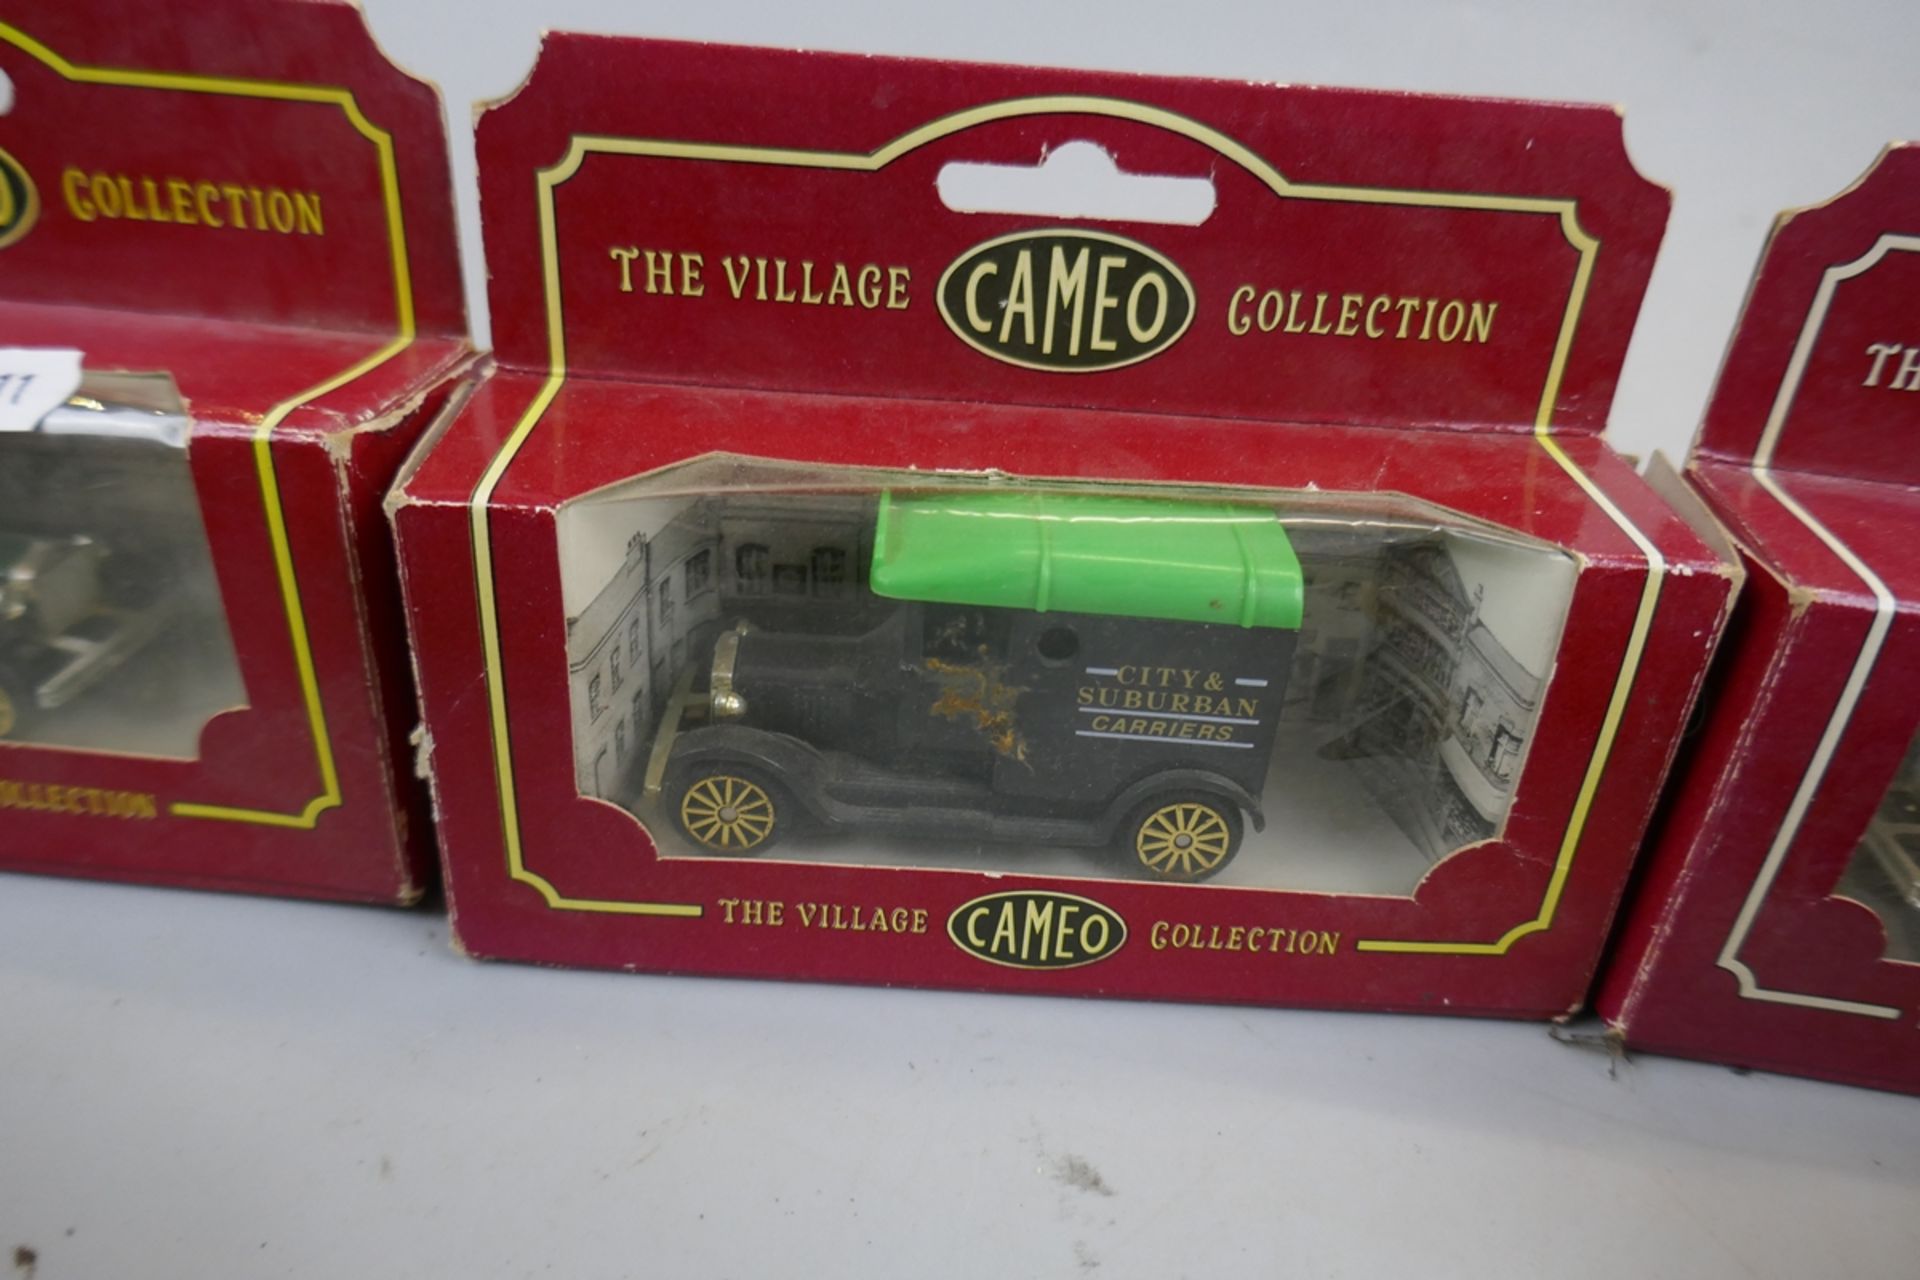 Collection of die cast model vehicles, some in original boxes - Image 11 of 13